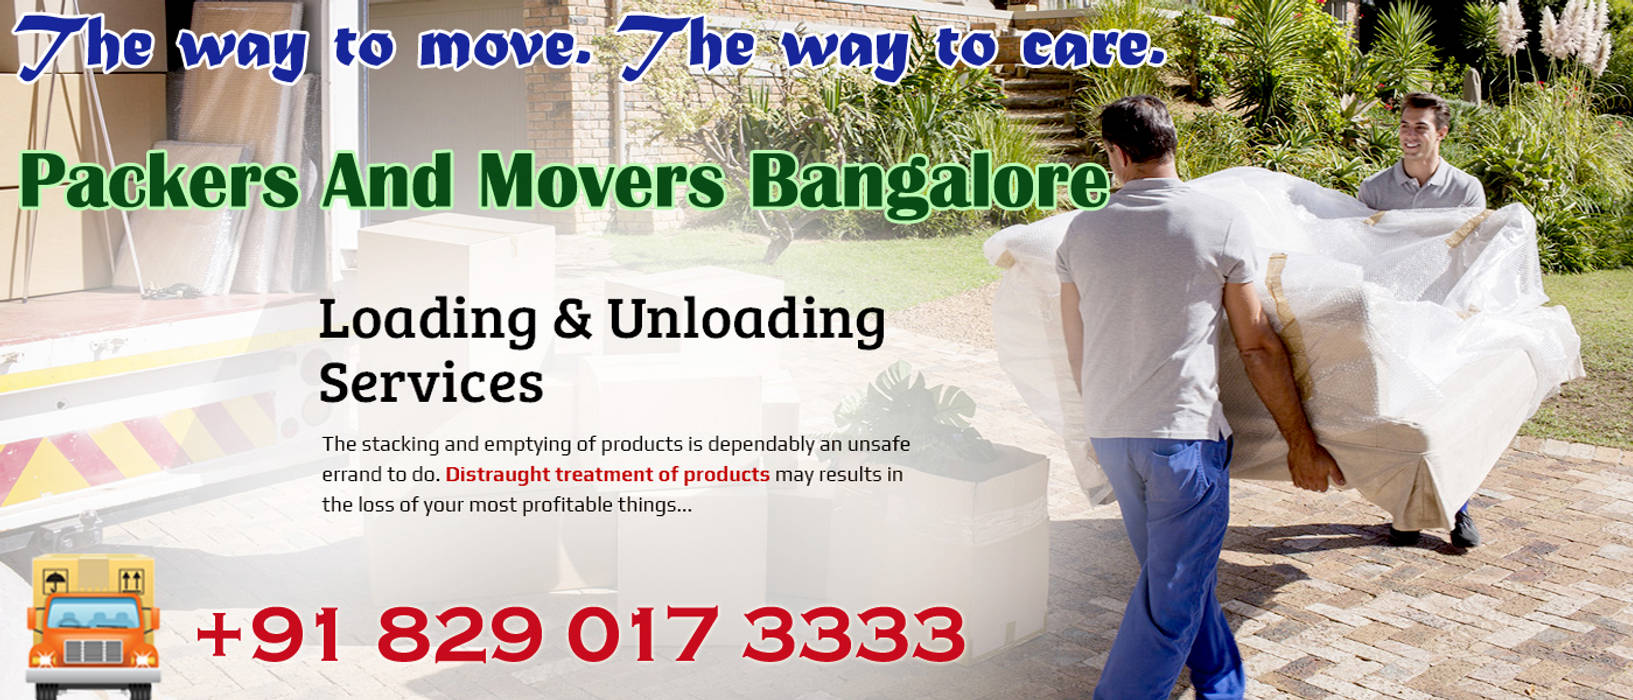 Tips On Renting A Moving Truck When Going For DIY Move, Packers And Movers Bangalore Packers And Movers Bangalore مساحات تجارية محلات تجارية